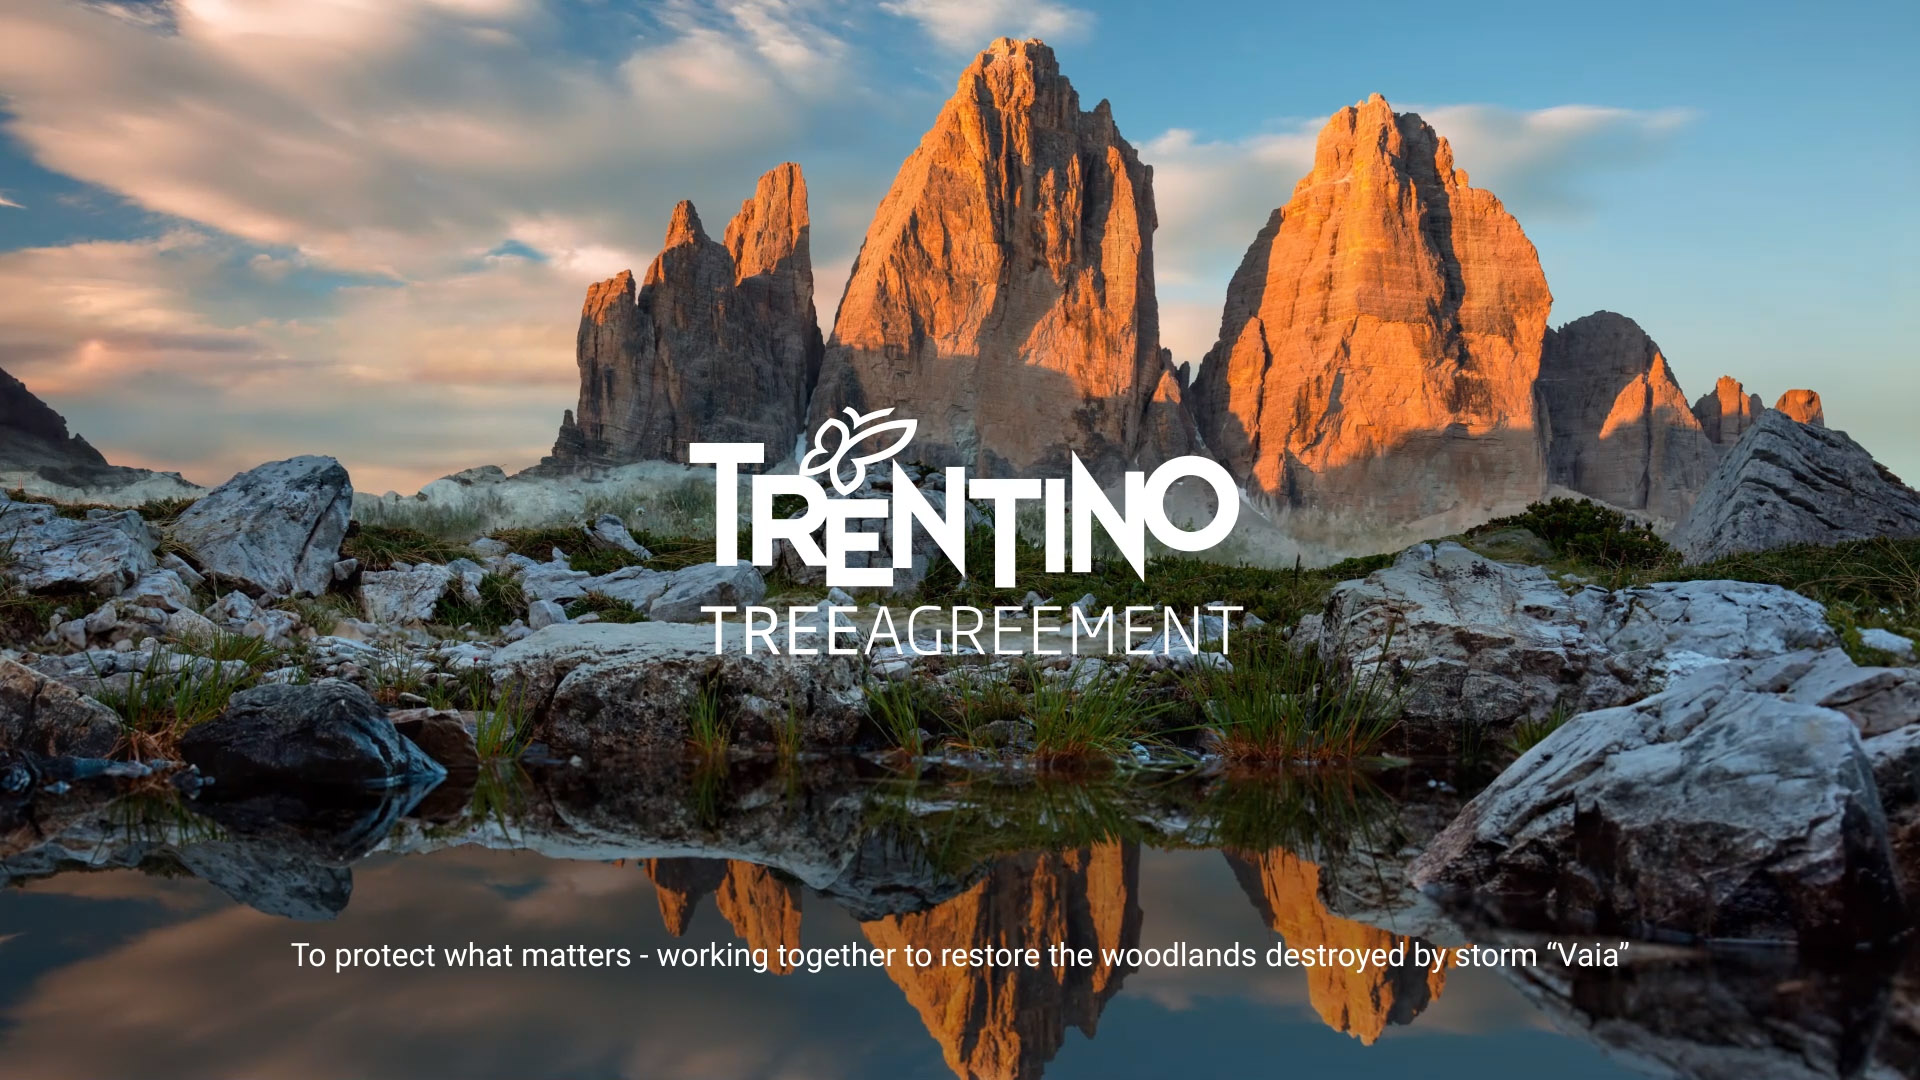 Trentino tree agreement — to protect what matters, still frame from animation